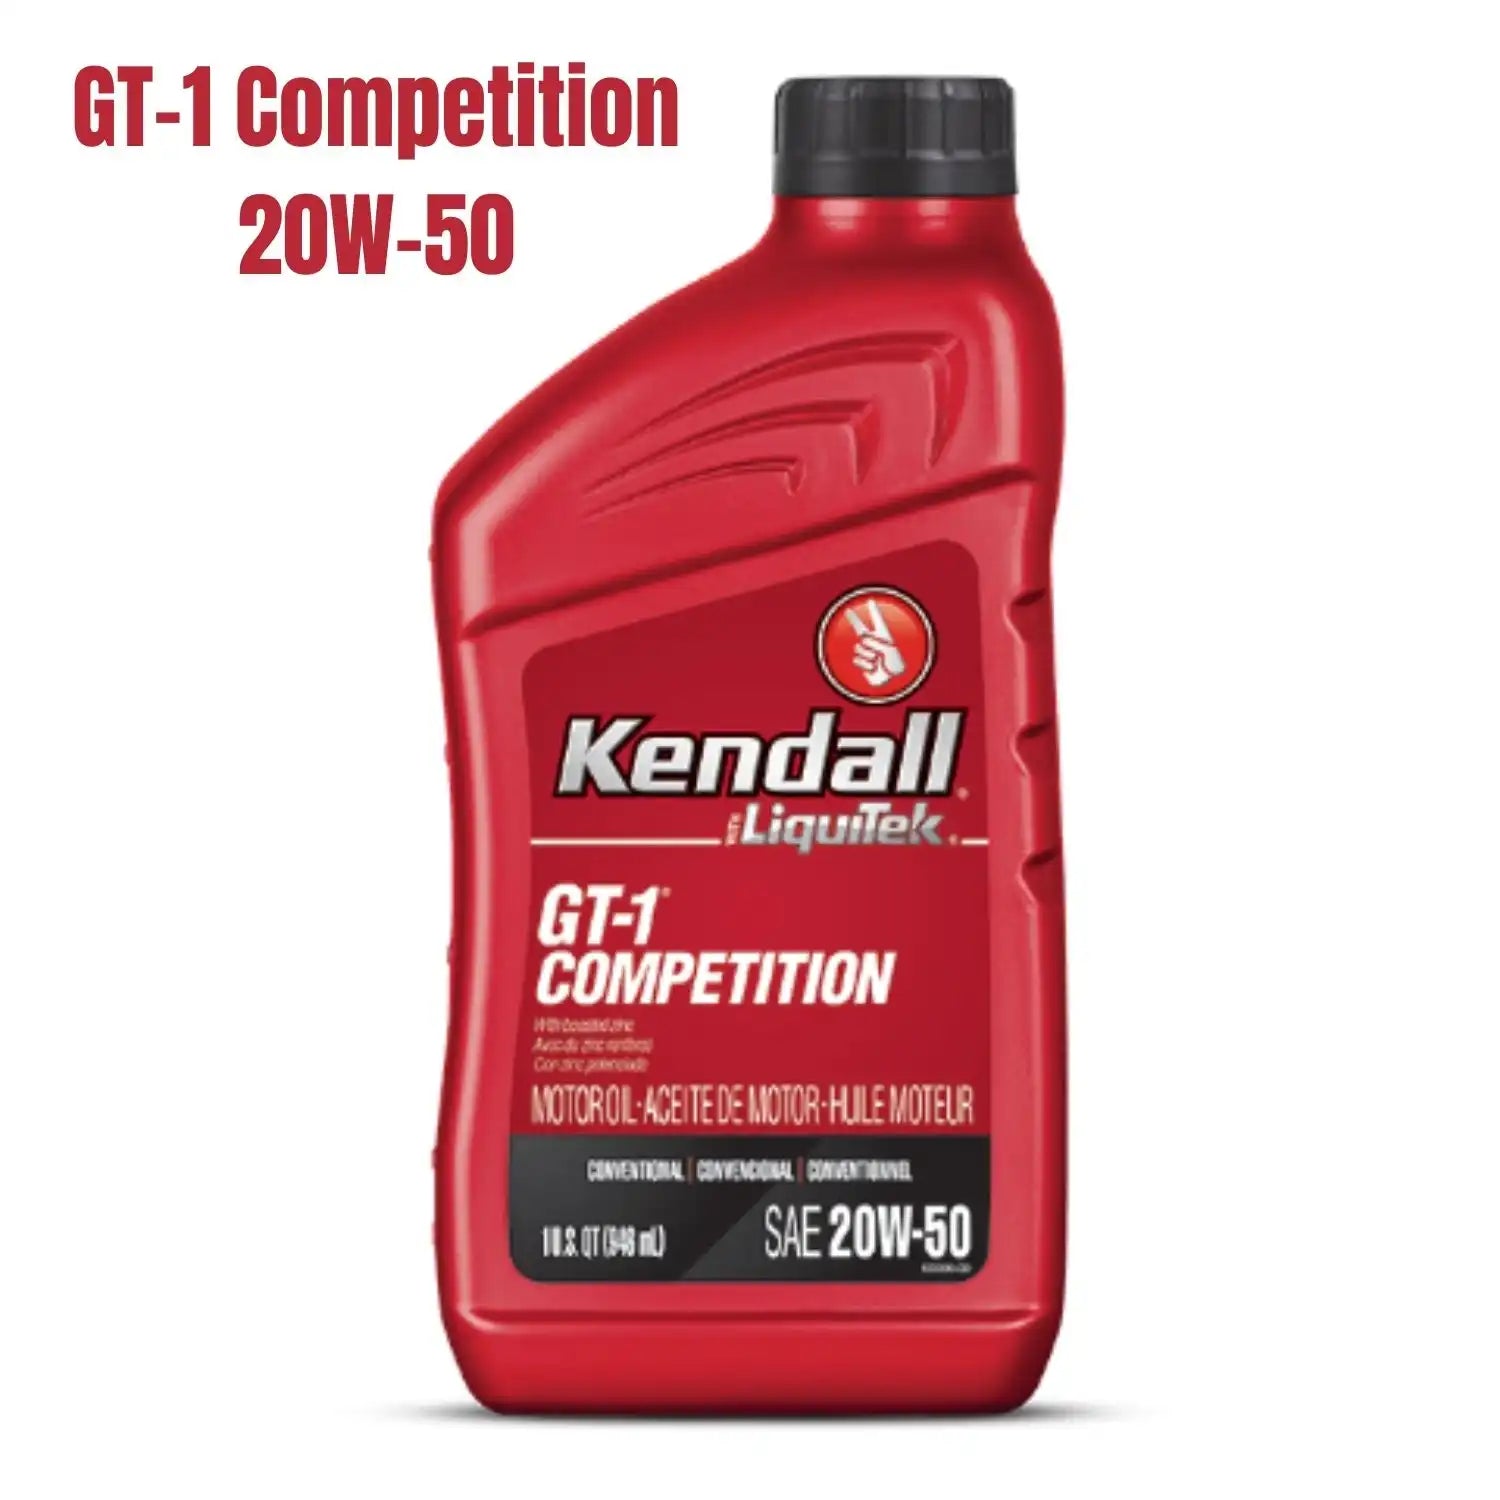 Kendall Gt-1 Competition 20W-50 Car Engine Oil (1 Liter)